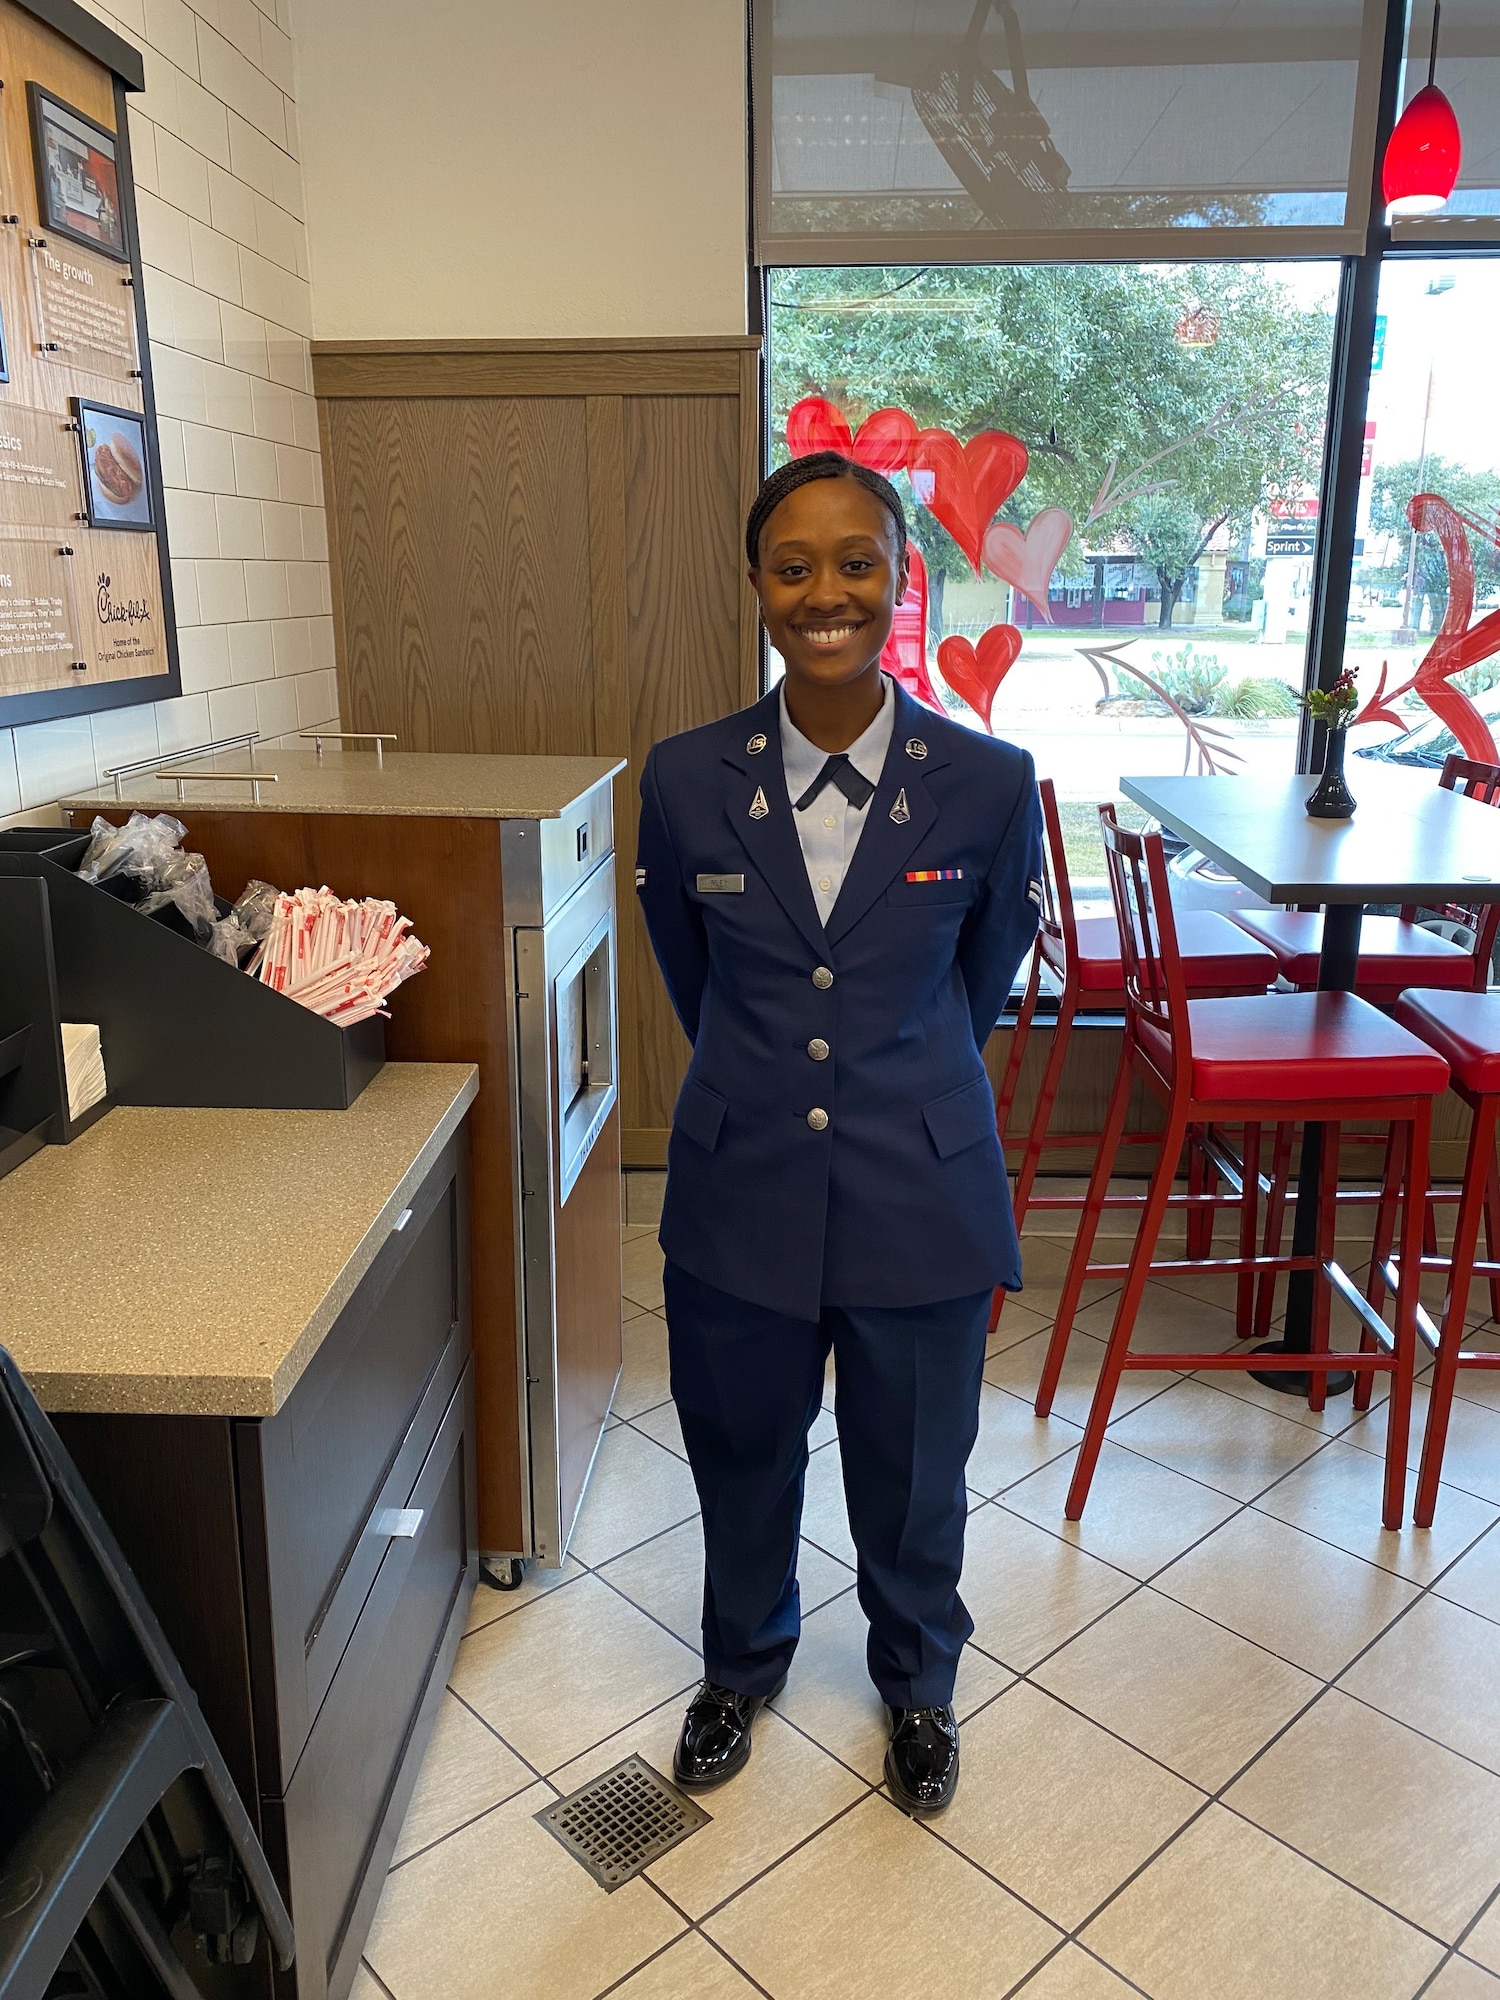 U.S. Space Force Spc. 3 Shayla Wiley, 74th Intelligence, Surveillance and Reconnaissance stands alone in a restaurant wearing Space Force blues.